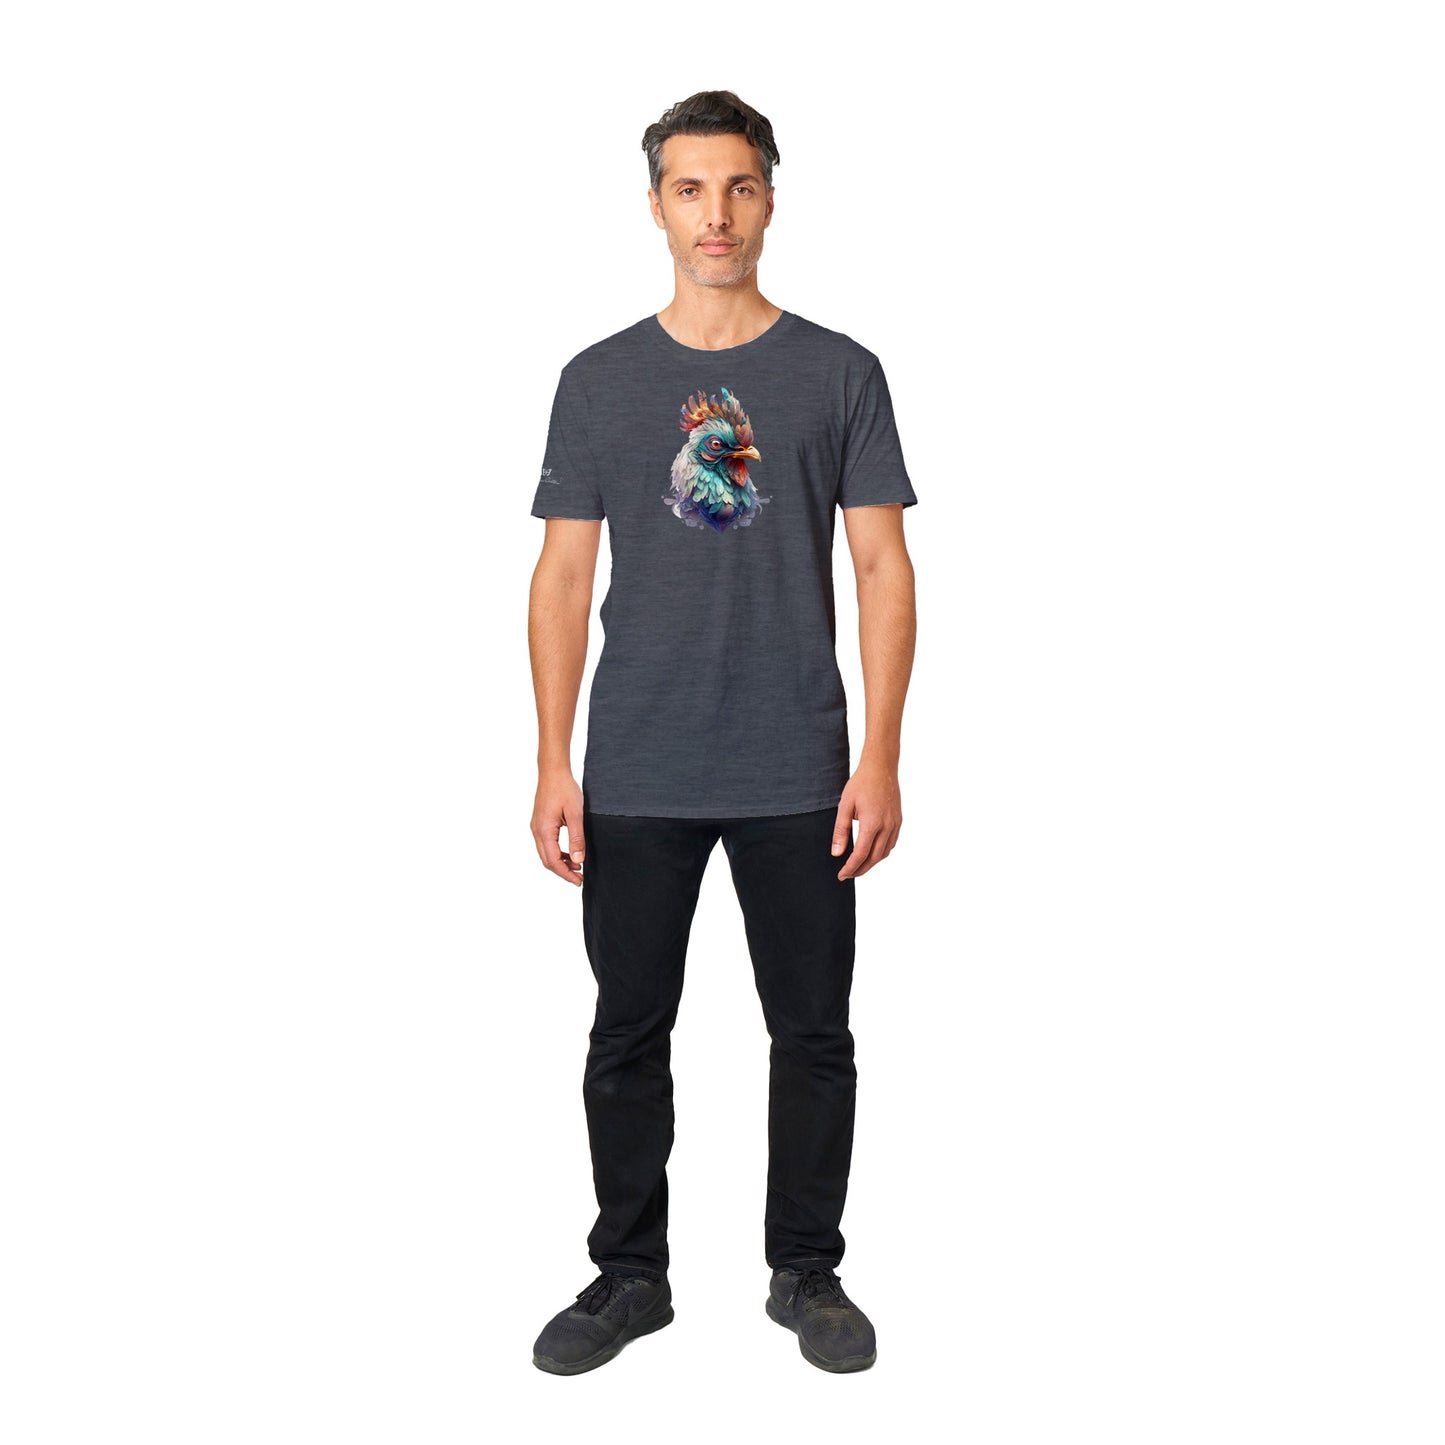 Fantasy Outraged Rooster - Unisex Crewneck T-shirt